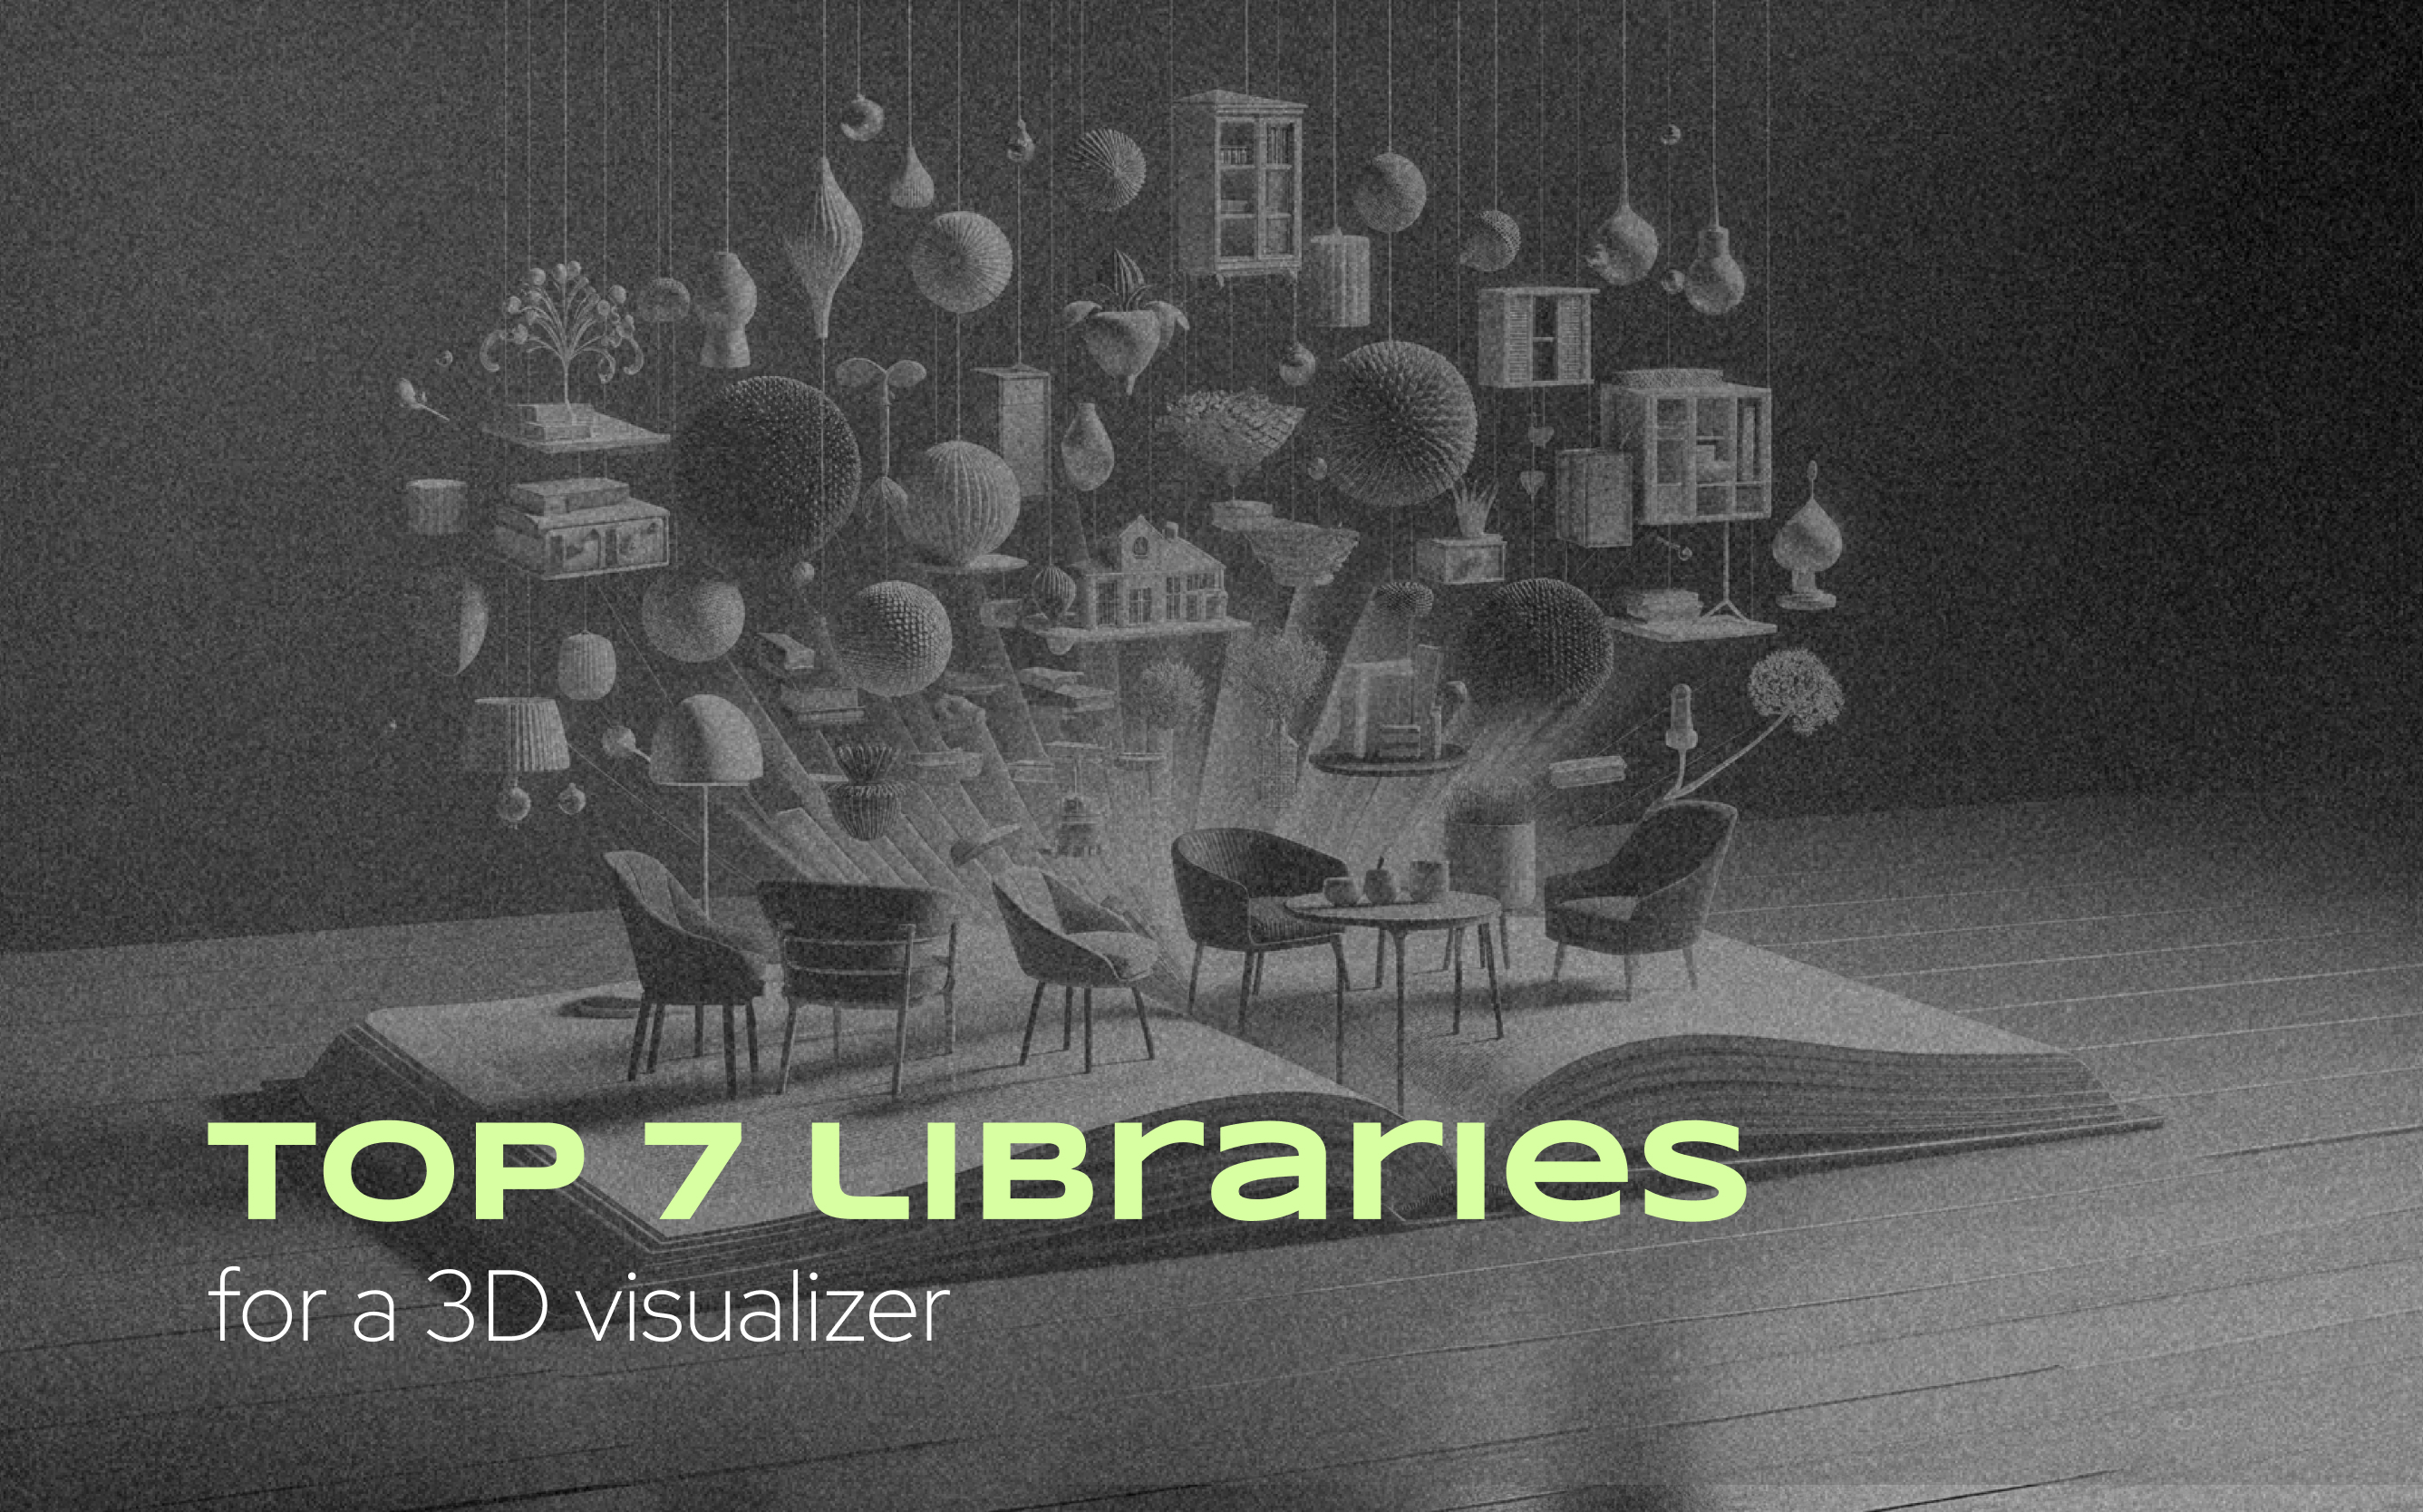 Top 7 libraries for a 3D visualizer